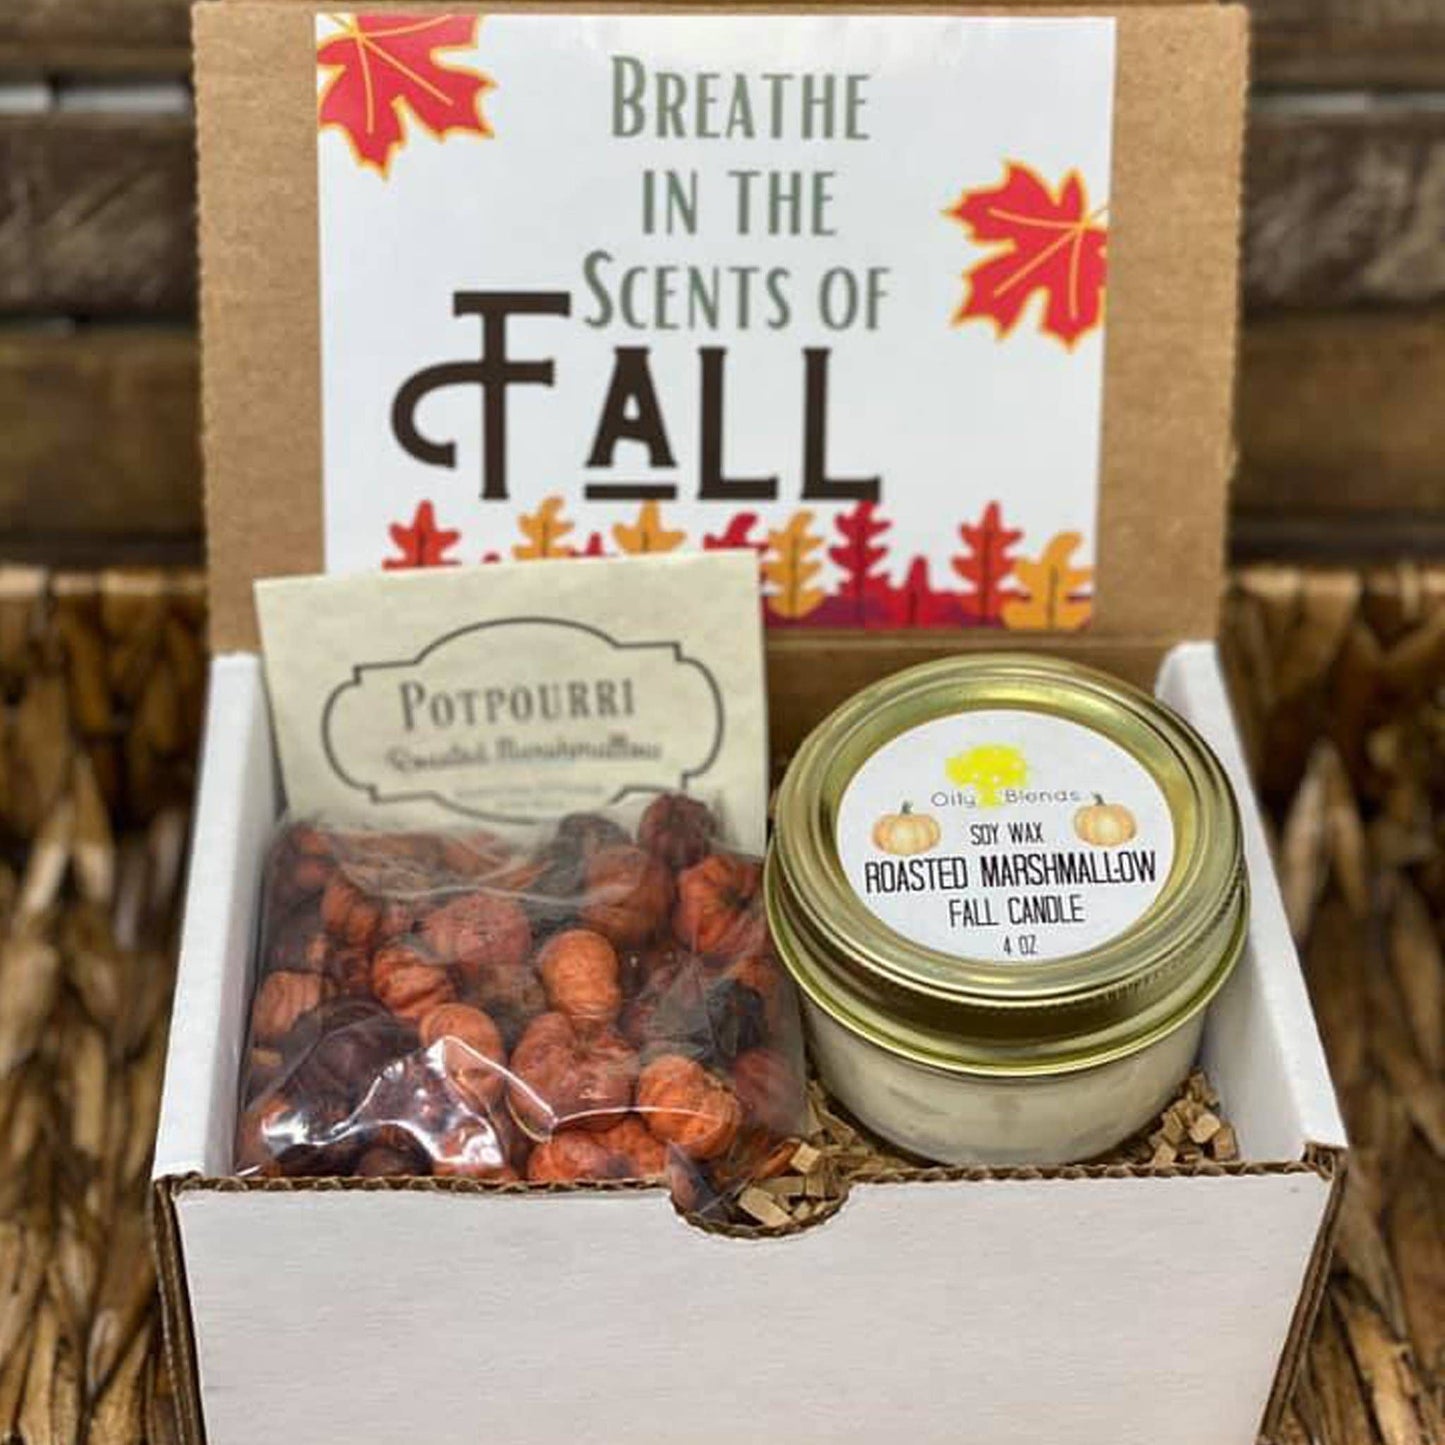 Fall Gift Boxes with Candle and Potpourri: Roasted Marshmallow